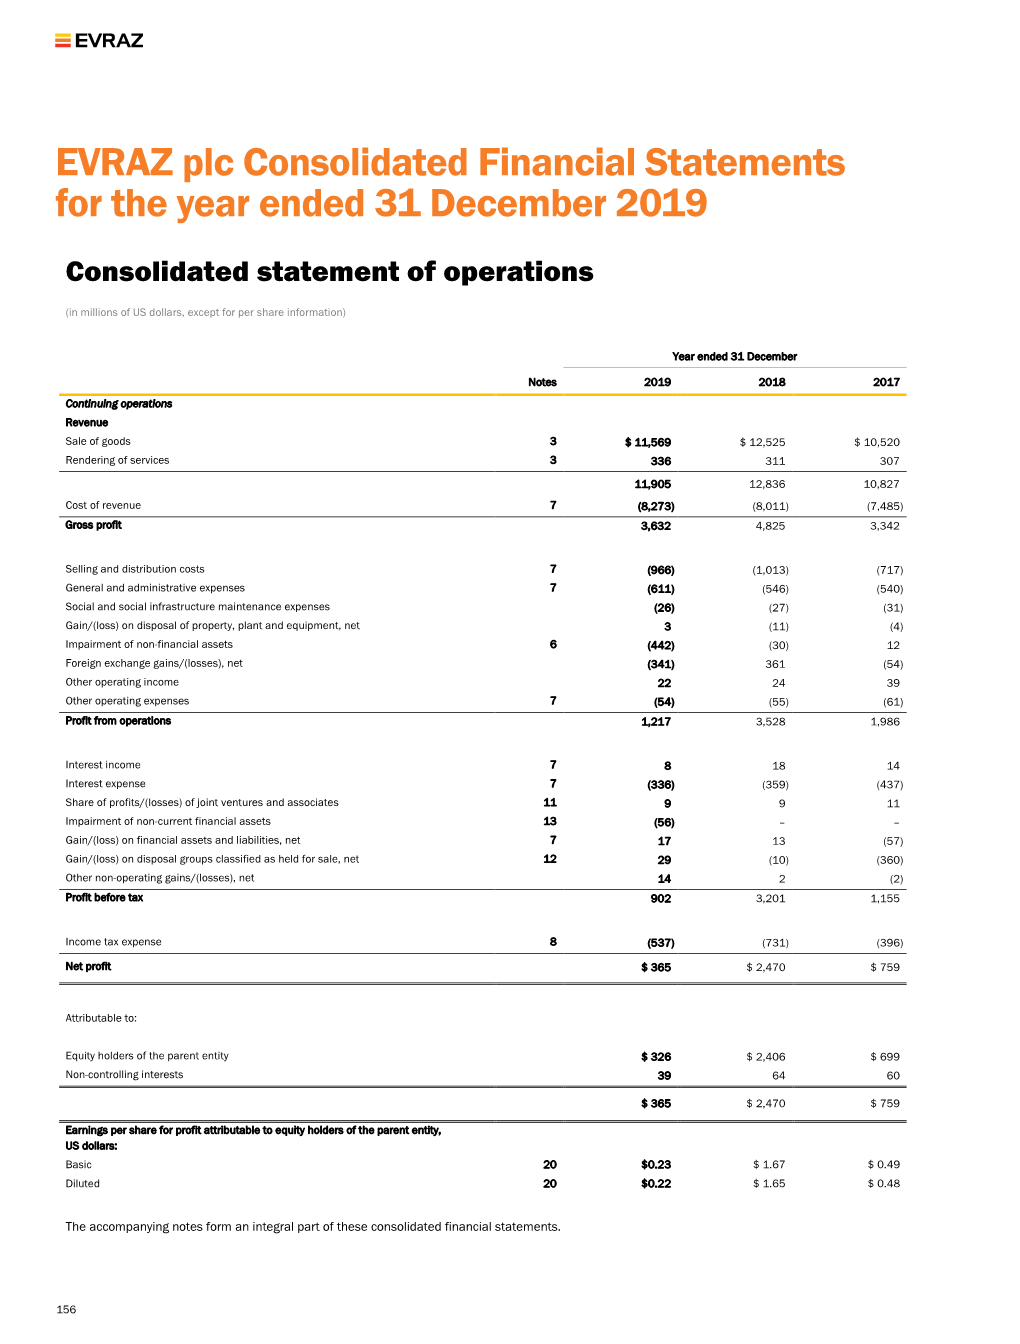 EVRAZ Plc Consolidated Financial Statements for the Year Ended 31 December 2019